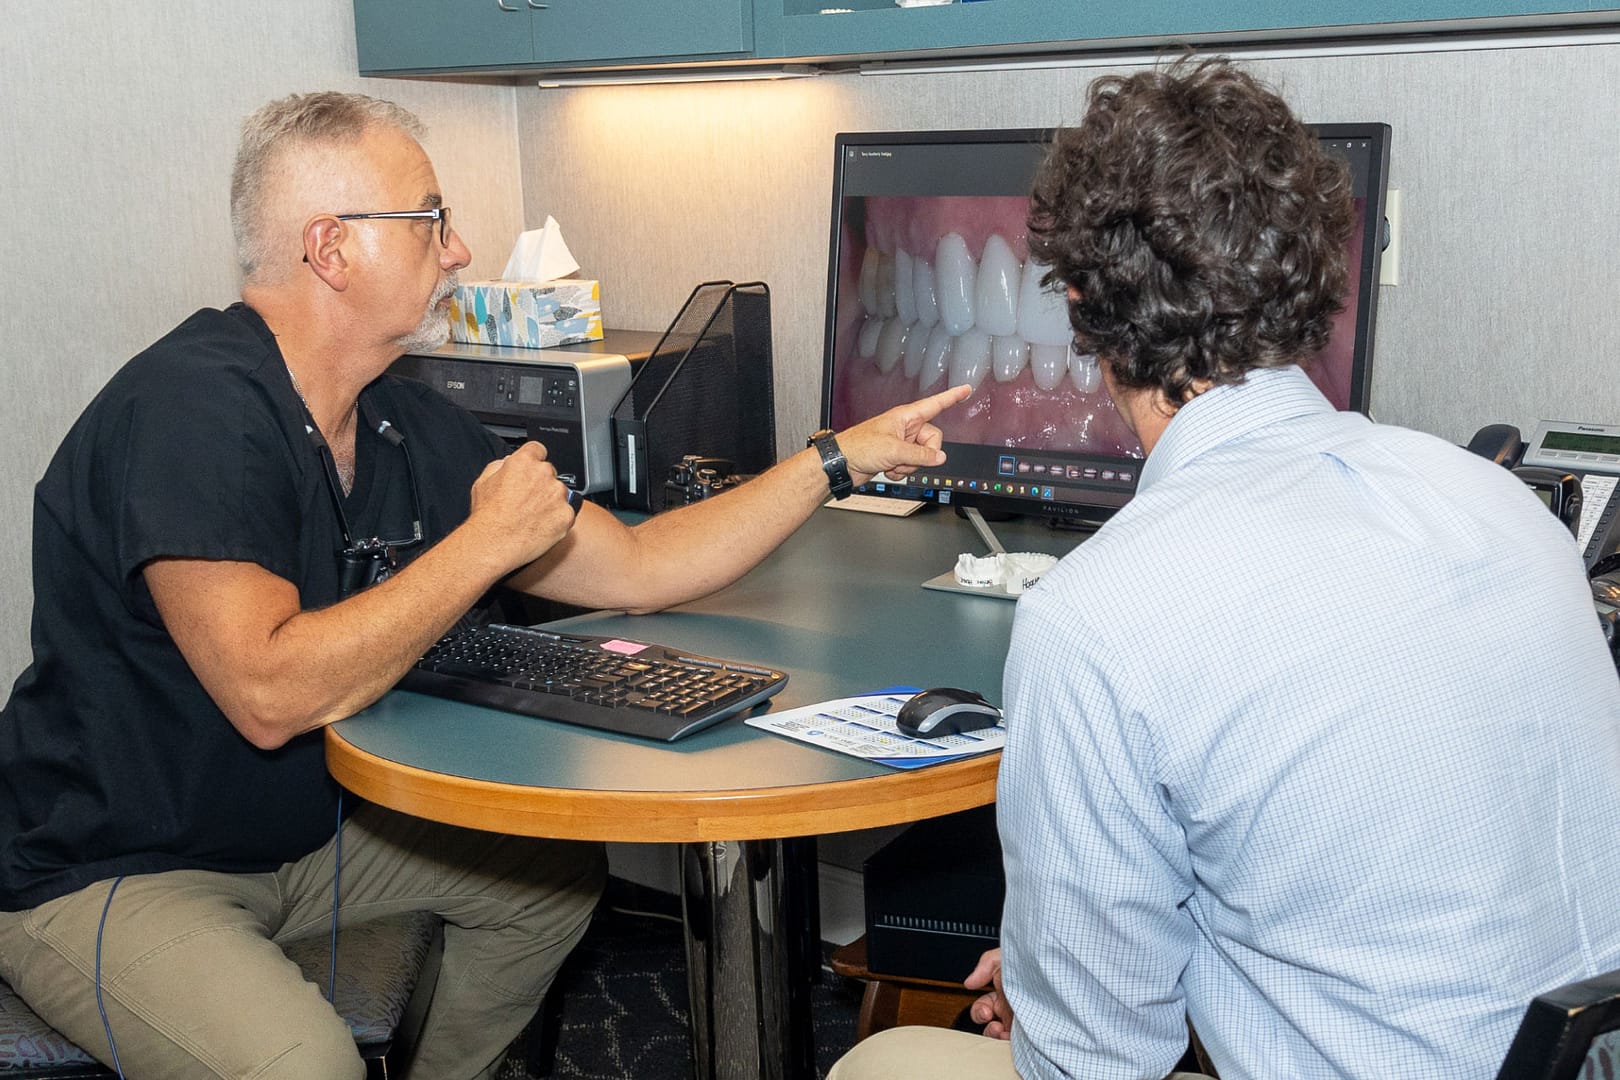 dr. goodman showing dental image to patient